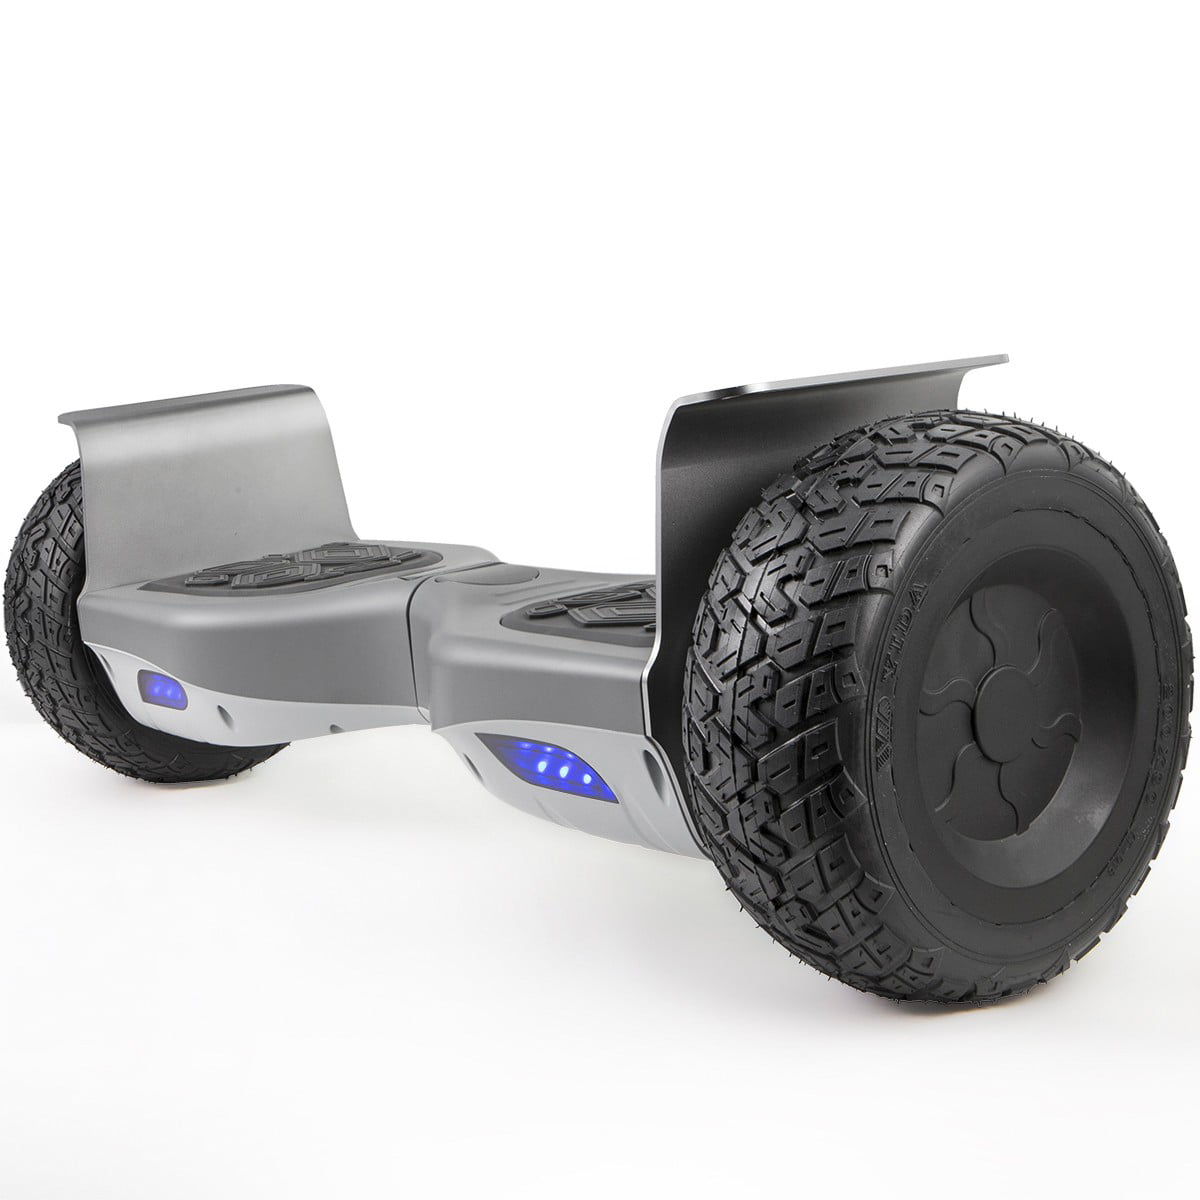 Red XtremepowerUS All Terrain 8.5 Inch Off-Road Self-Balancing Hoverboard 